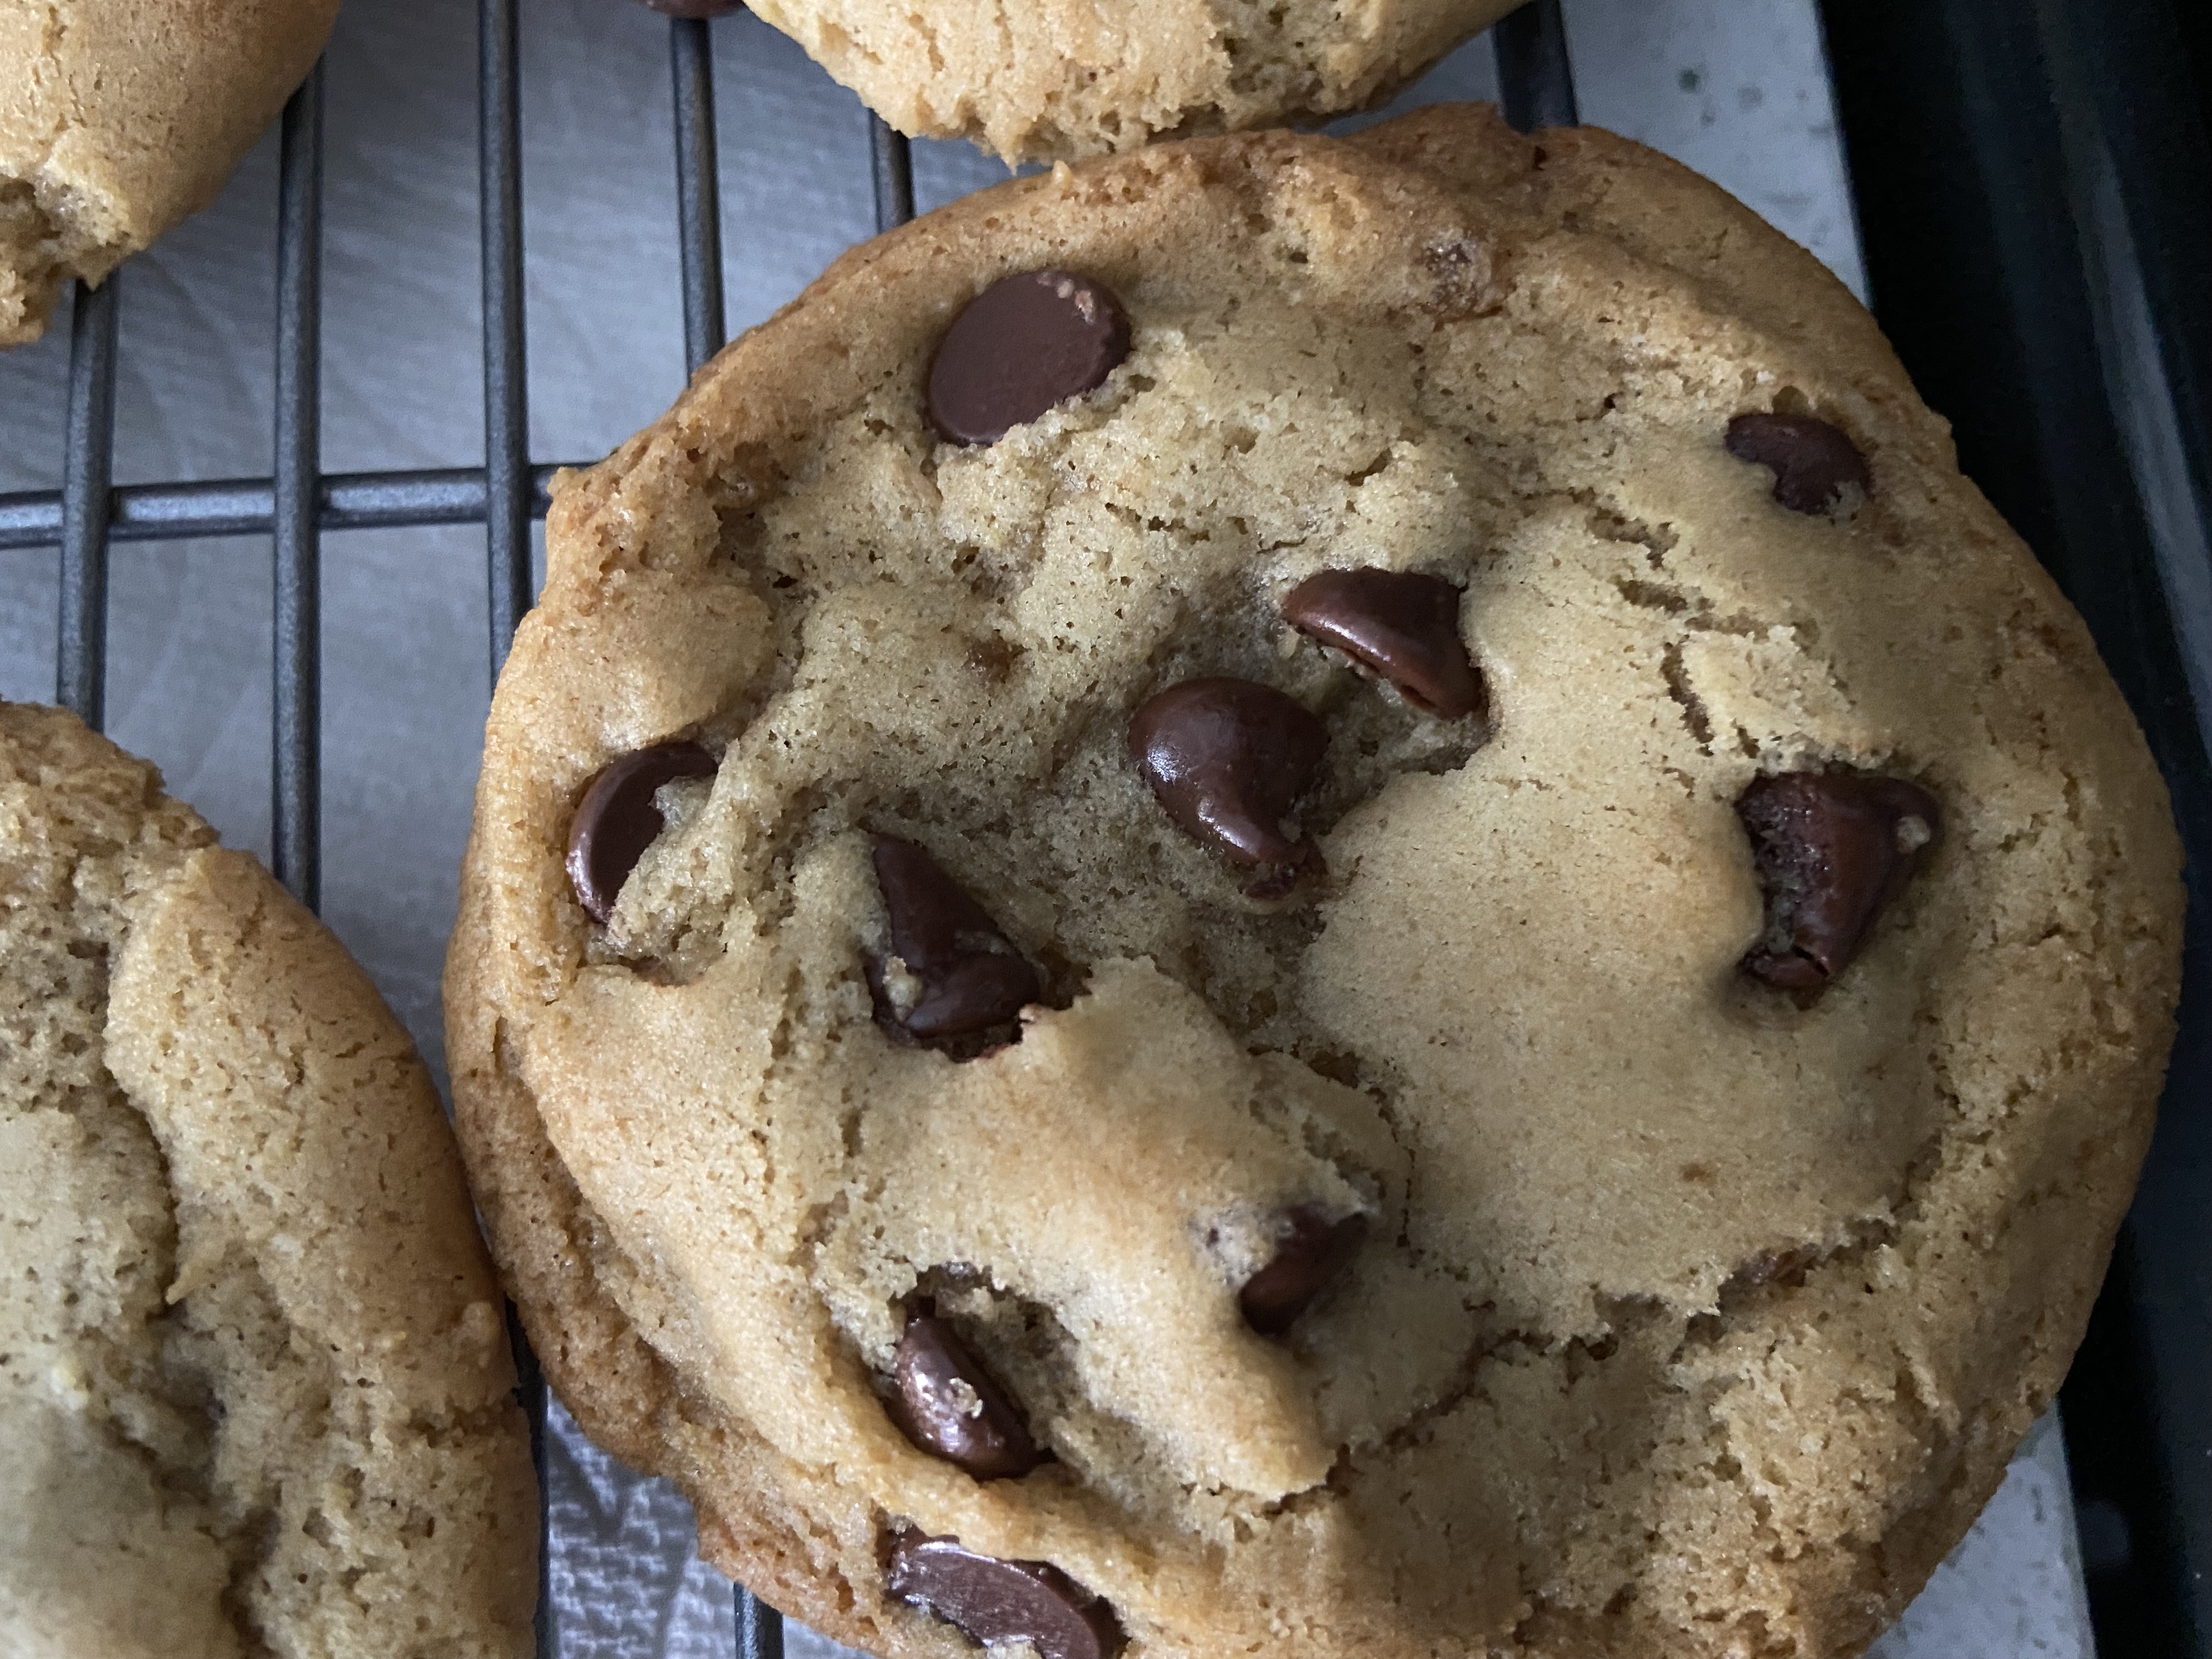 The Pastry Chef's Baking: Olive Oil Chocolate Chunk Cookies